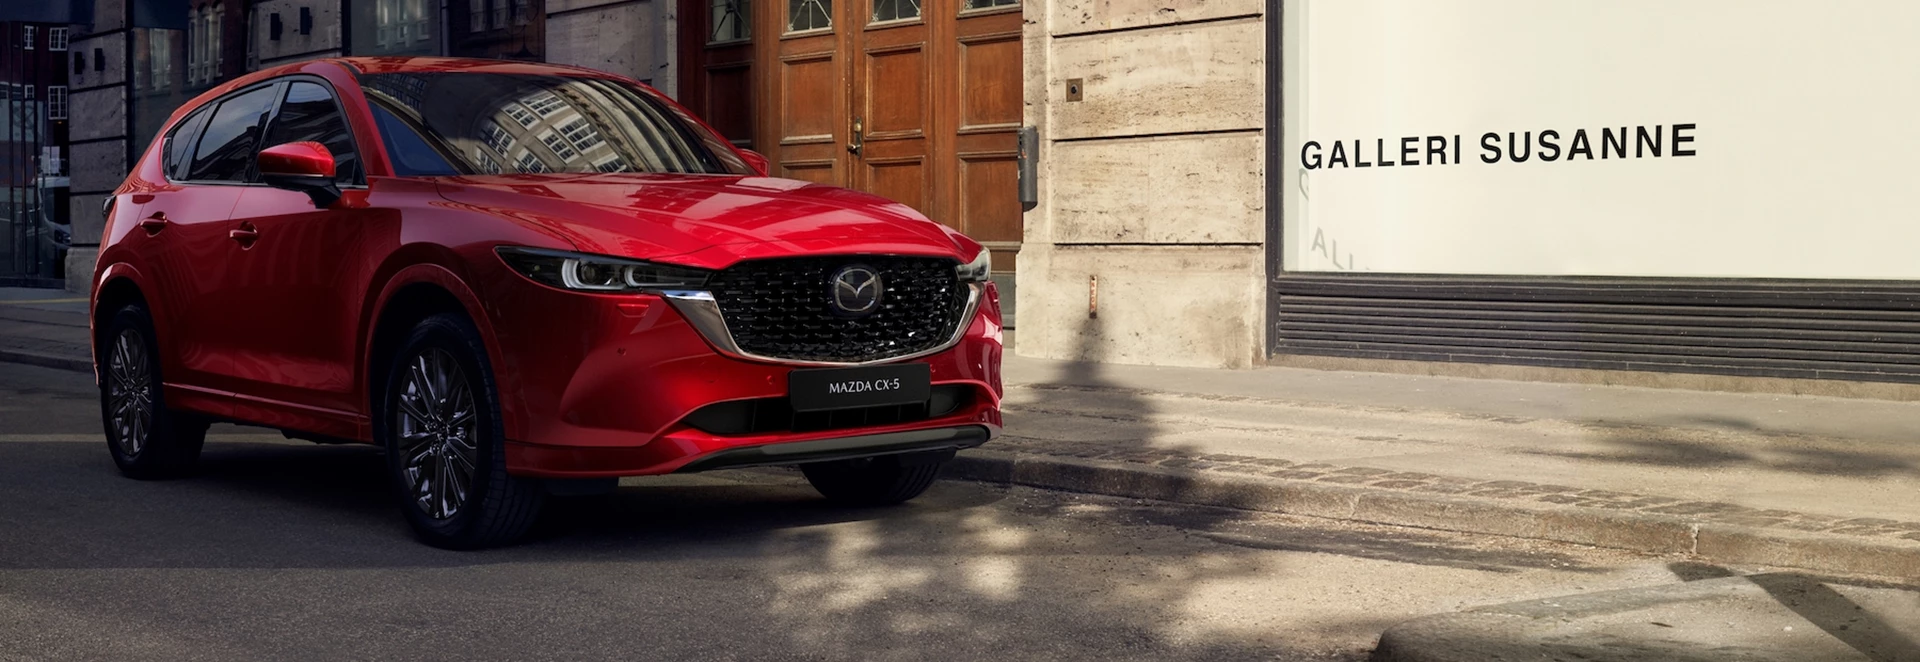 Mazda reveals revised CX-5 with drive improvements and new trim levels 